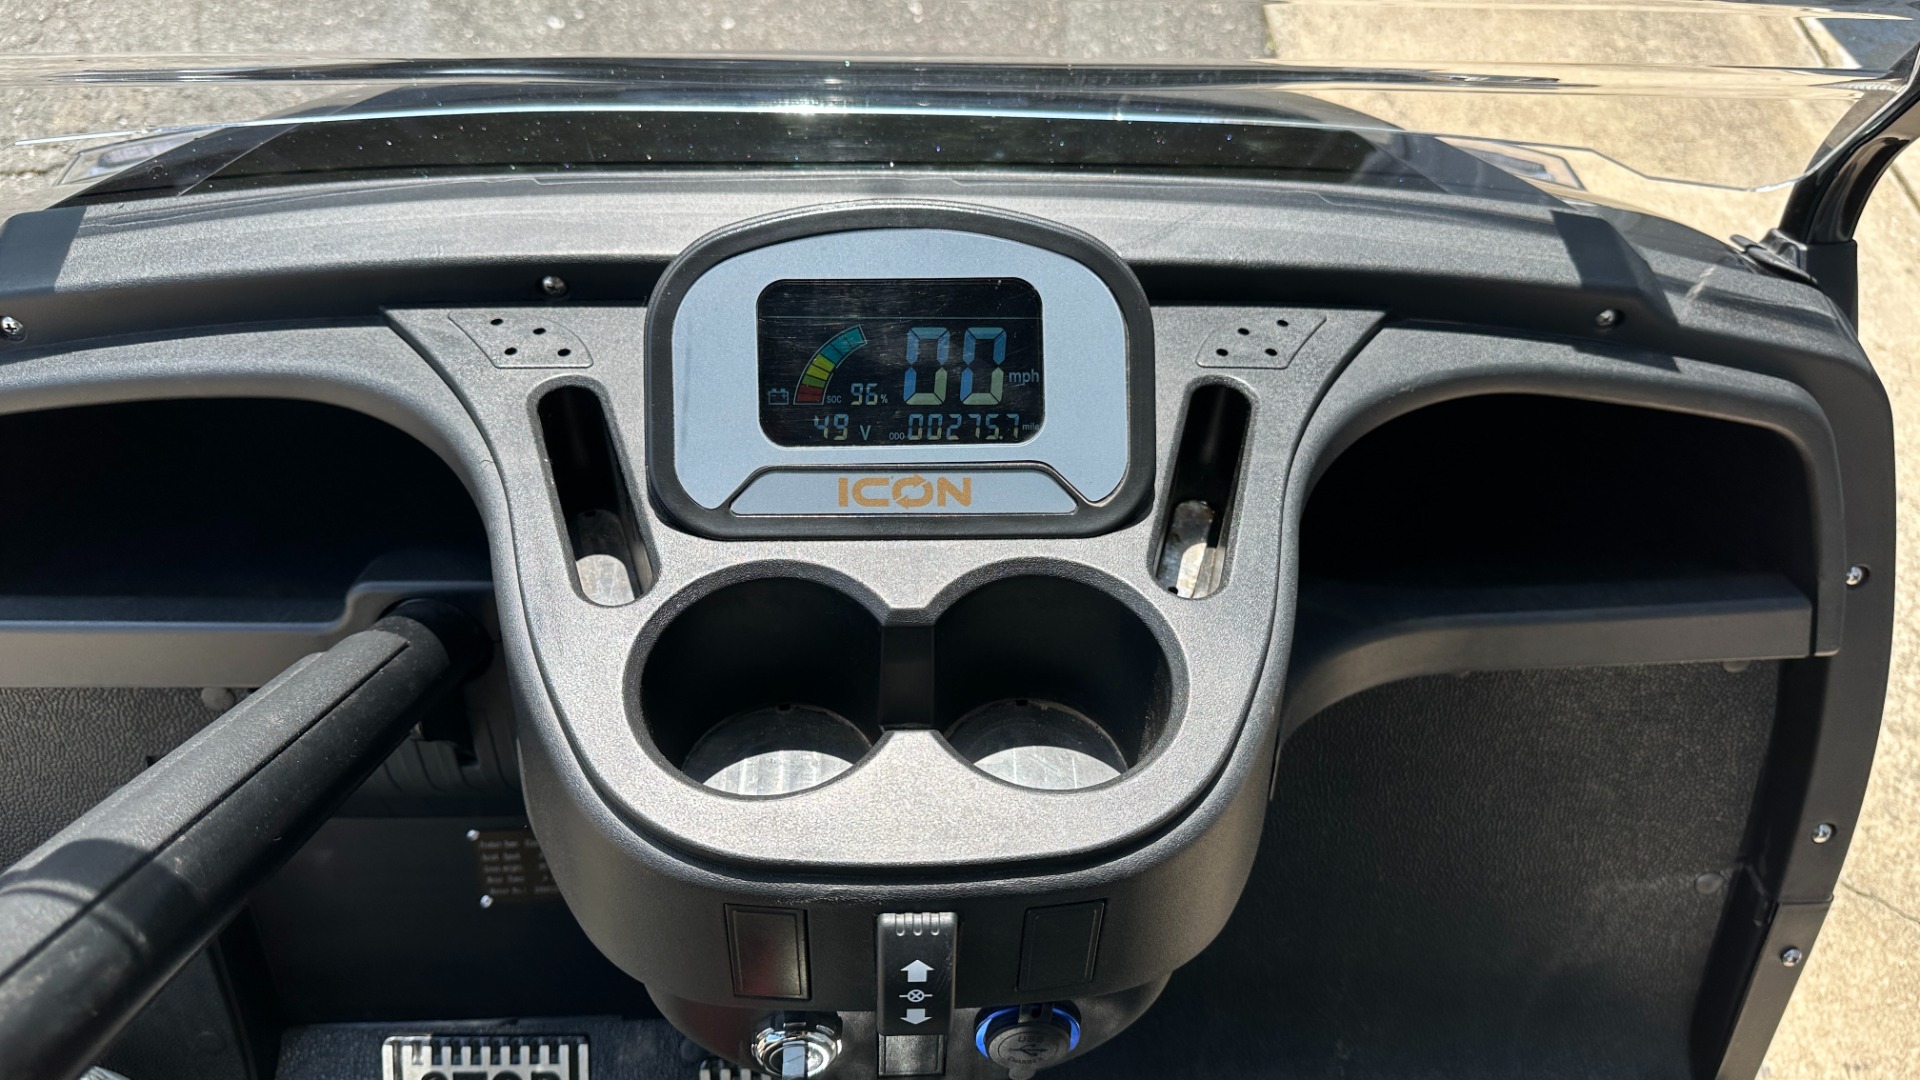 Used 2020 ICON i40L LIFTED / BLUETOOTH STEREO / ELECTRIC / DIGITAL DISPLAY / for sale $9,499 at Formula Imports in Charlotte NC 28227 35